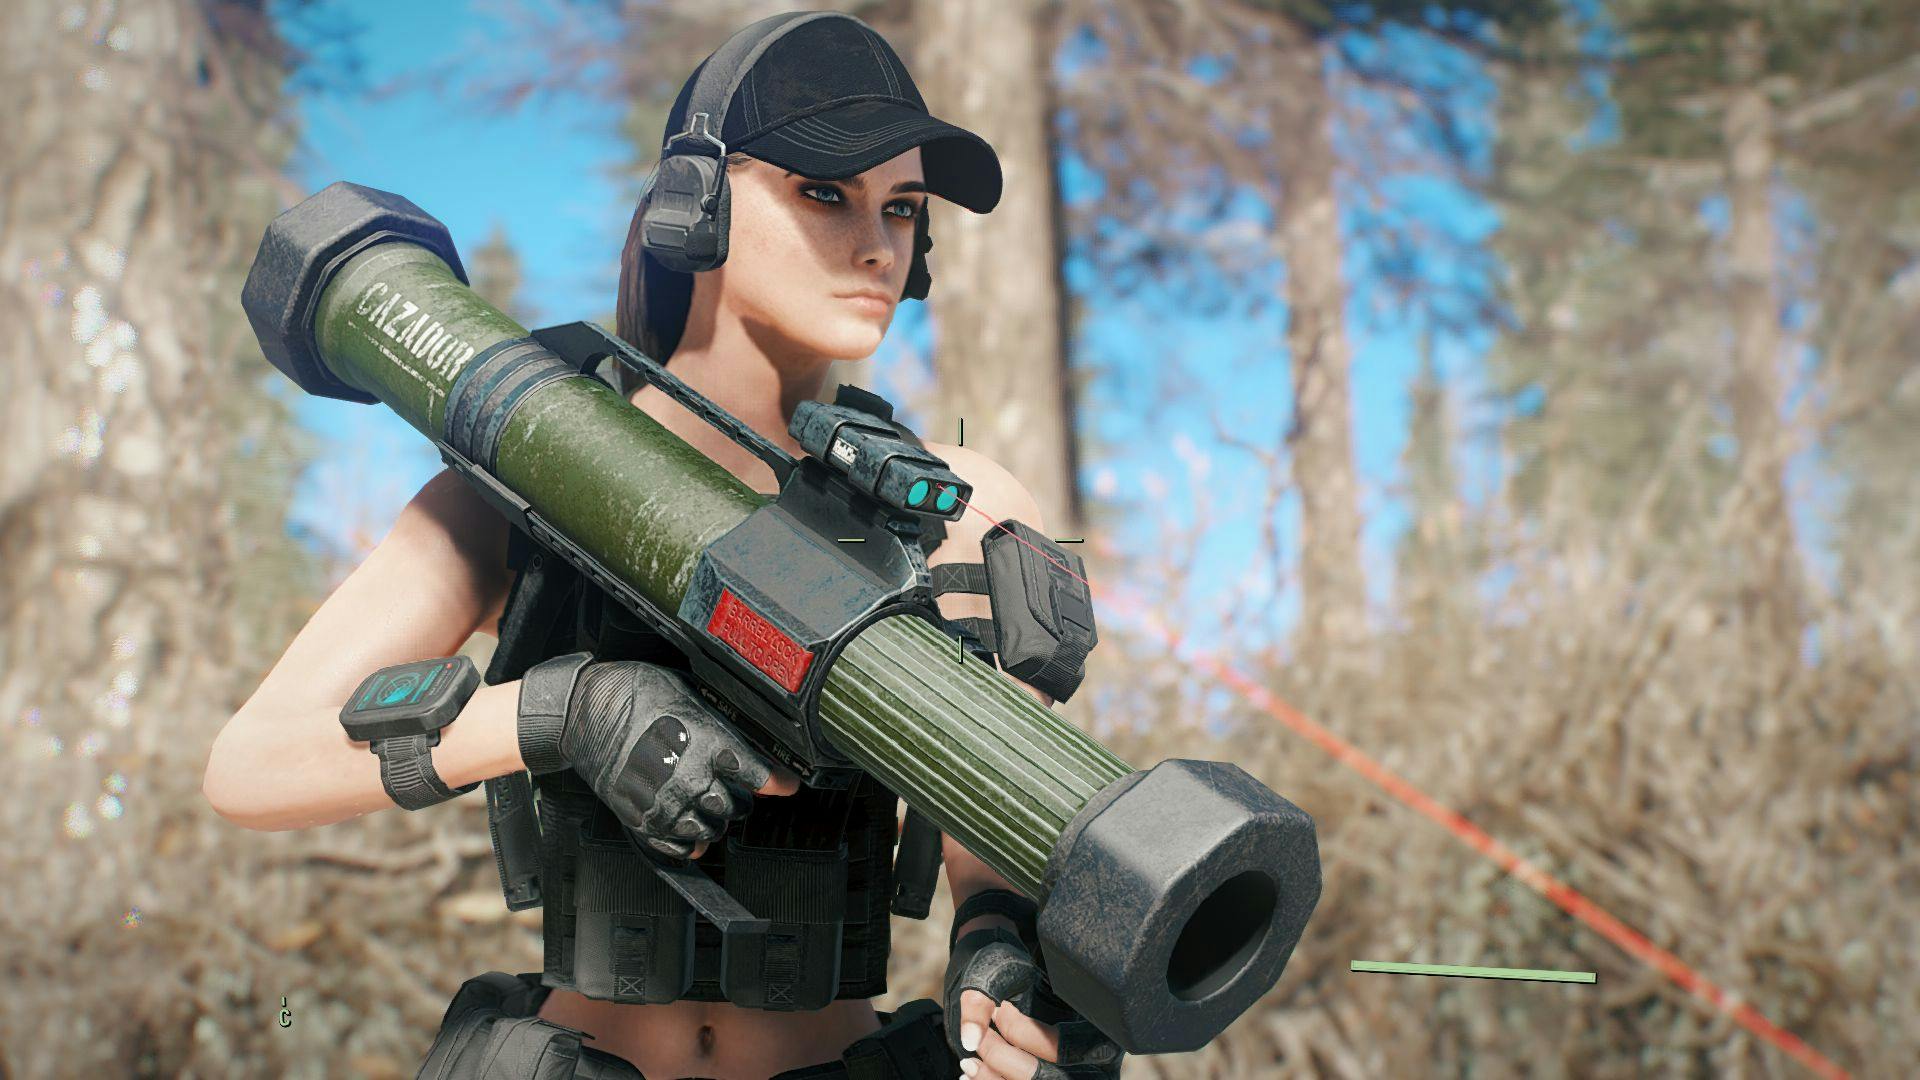 featured image - 9 Best Fallout 4 Weapons Mods in 2021